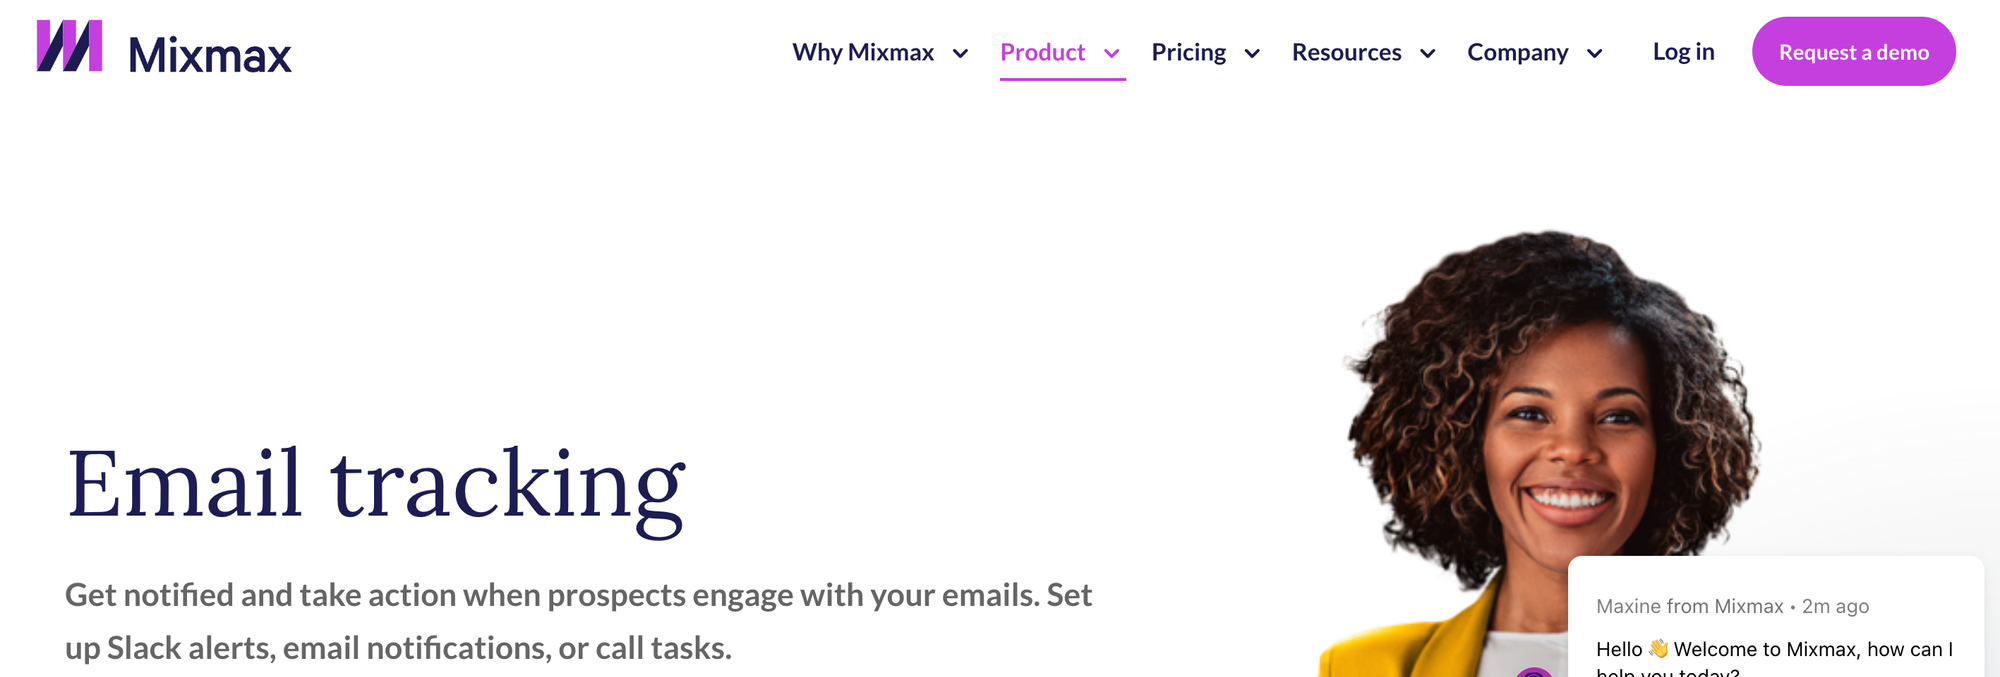 Mixmax - Best Email Tracking Software and Tool